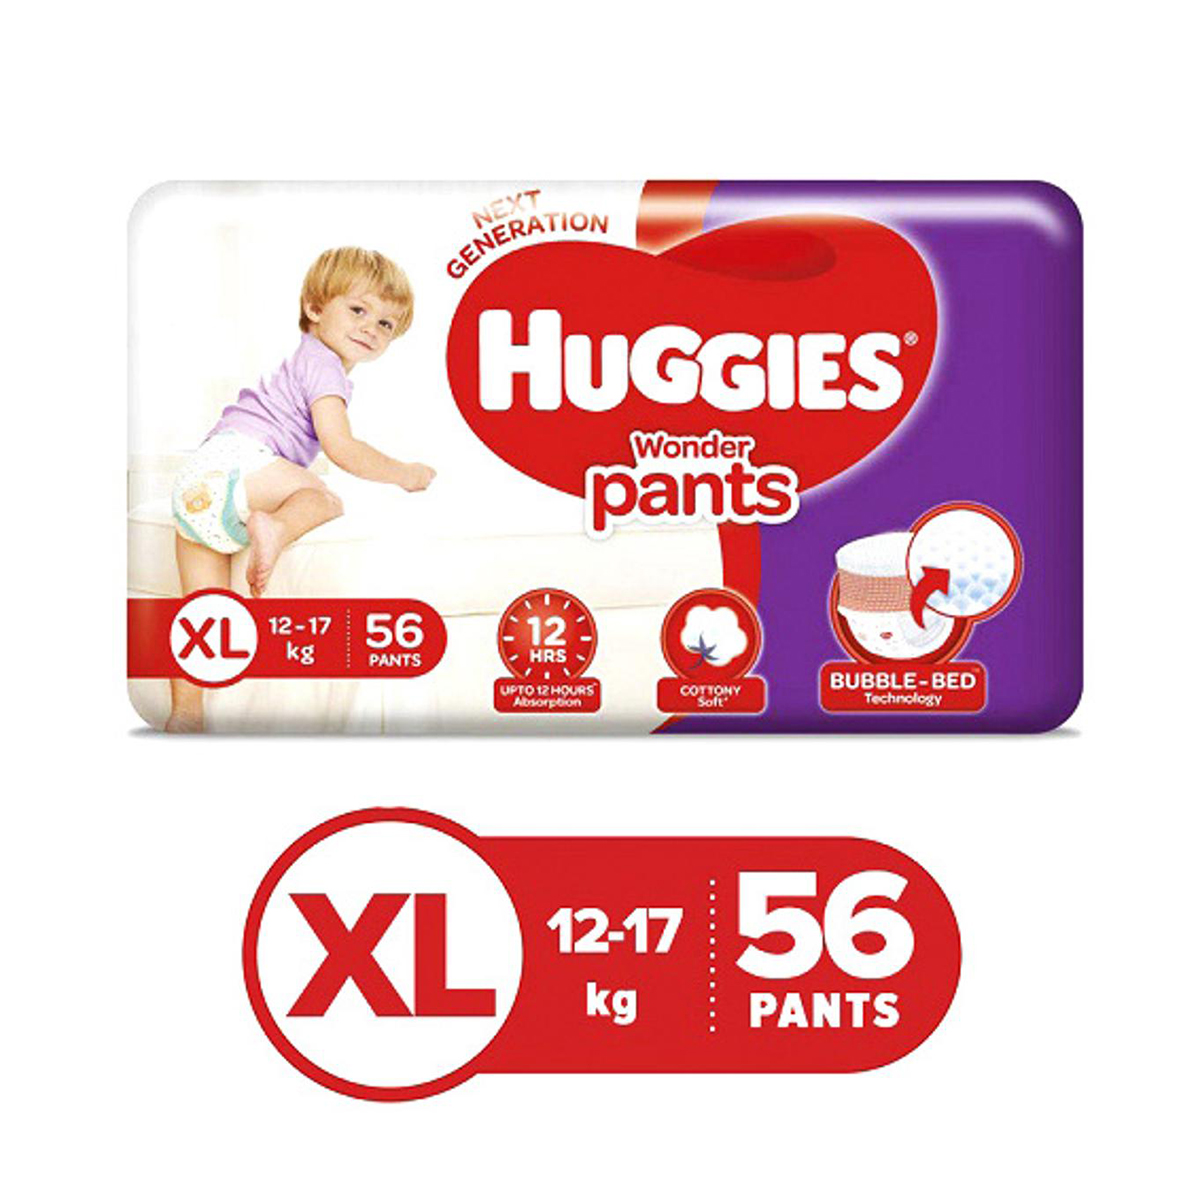 Buy Huggies Wonder Pants, Extra Large (XL) Size Diapers, 56 Count & Huggies  Premium Soft Pants, Extra Large (XL) Size Diaper Pants, 14 Count Online at  Low Prices in India - Amazon.in